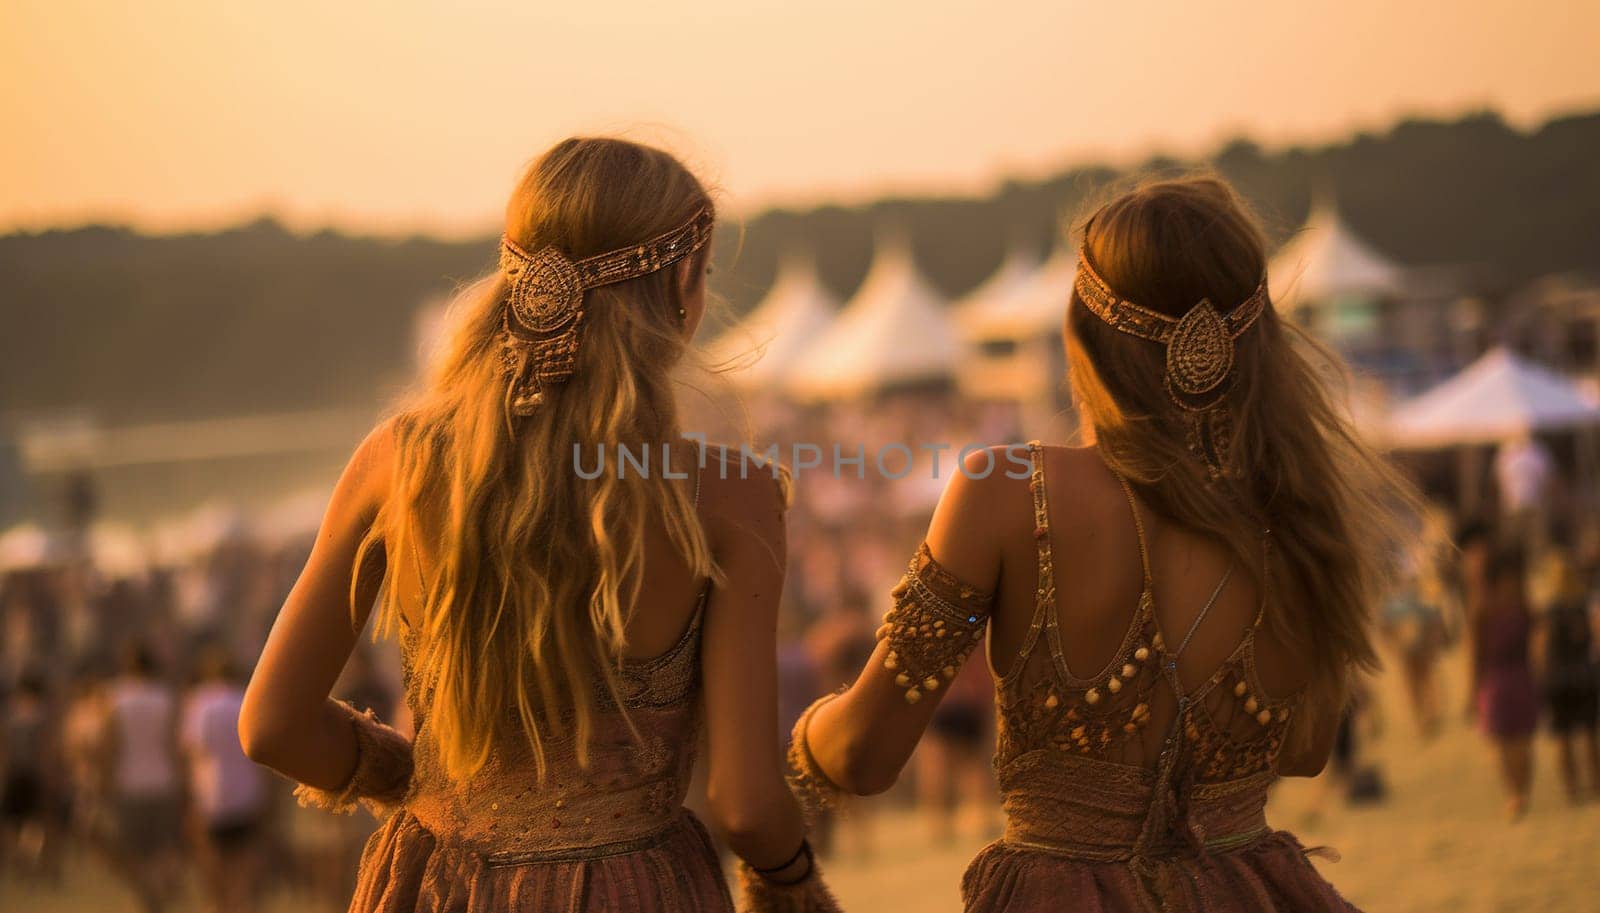 Two female friends dancing and having fun at music festival in the summer. Summer Holiday vacation concept. Happy young woman having fun sunlight bohemian style by Annebel146